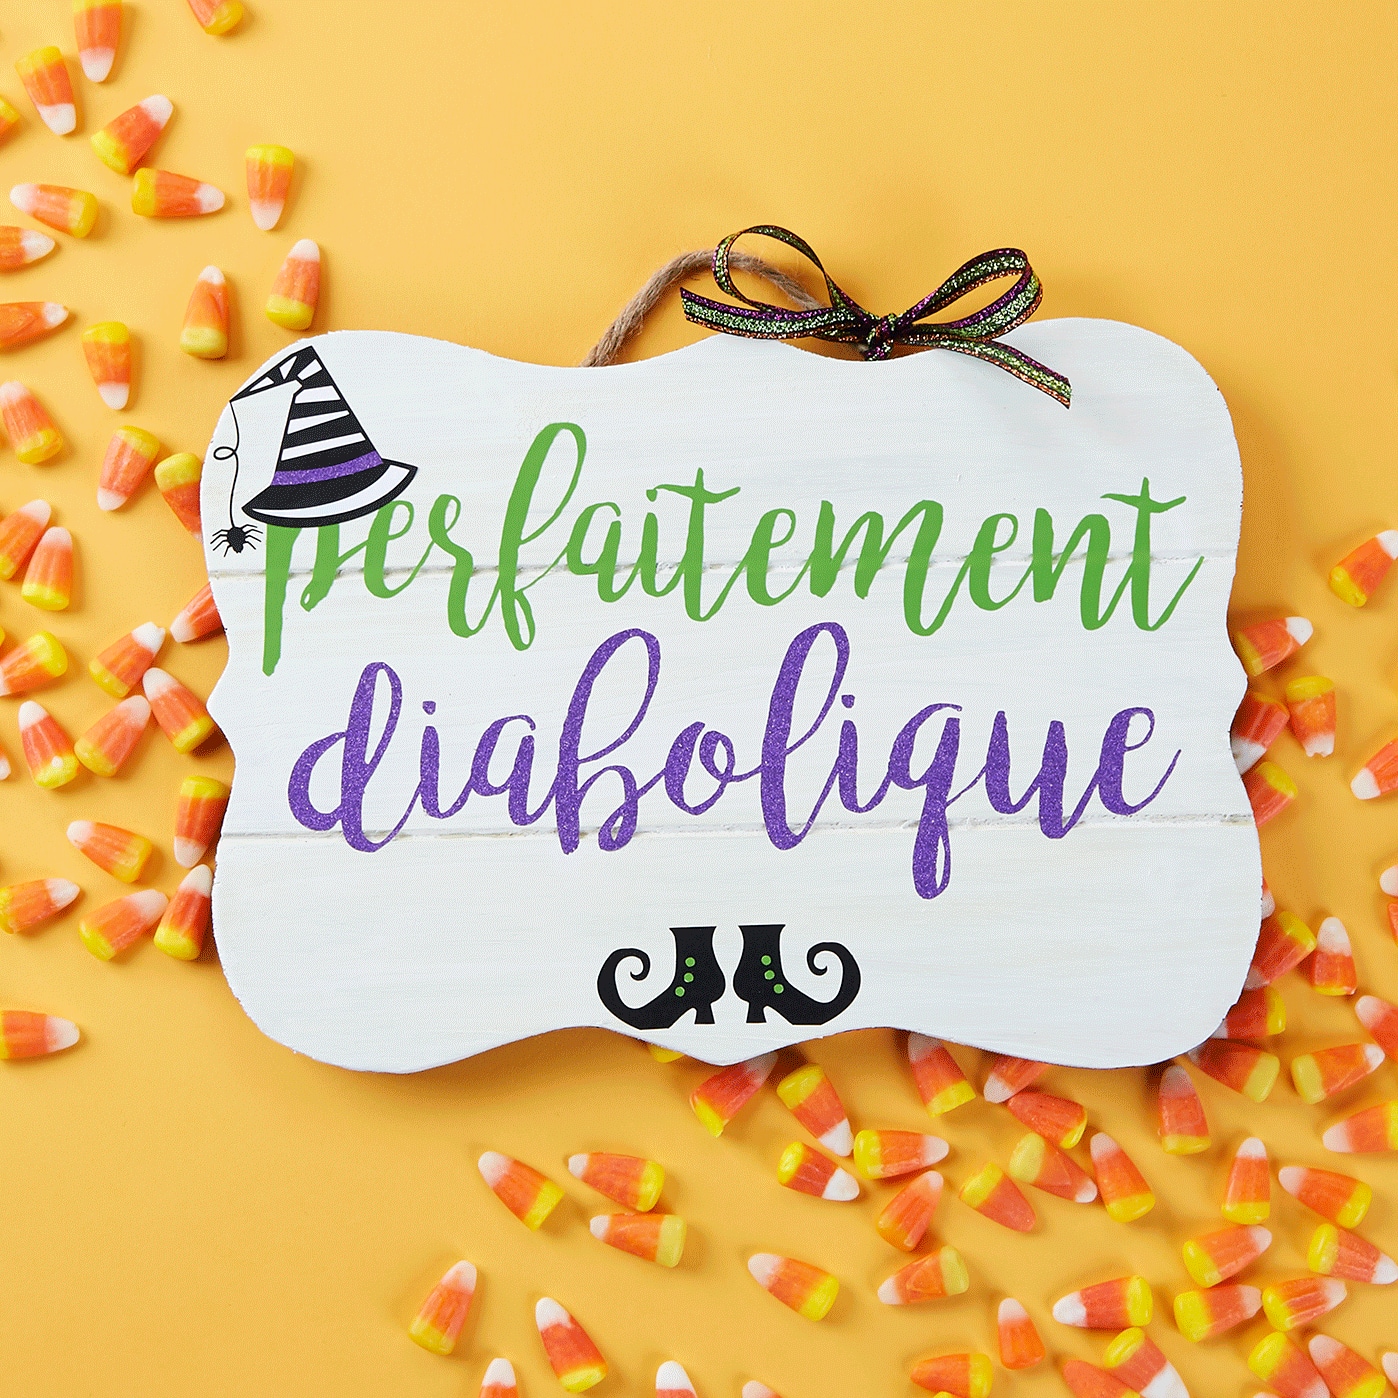 Halloween Welcome Sign with Cricut Maker 3 — Pattern Revolution